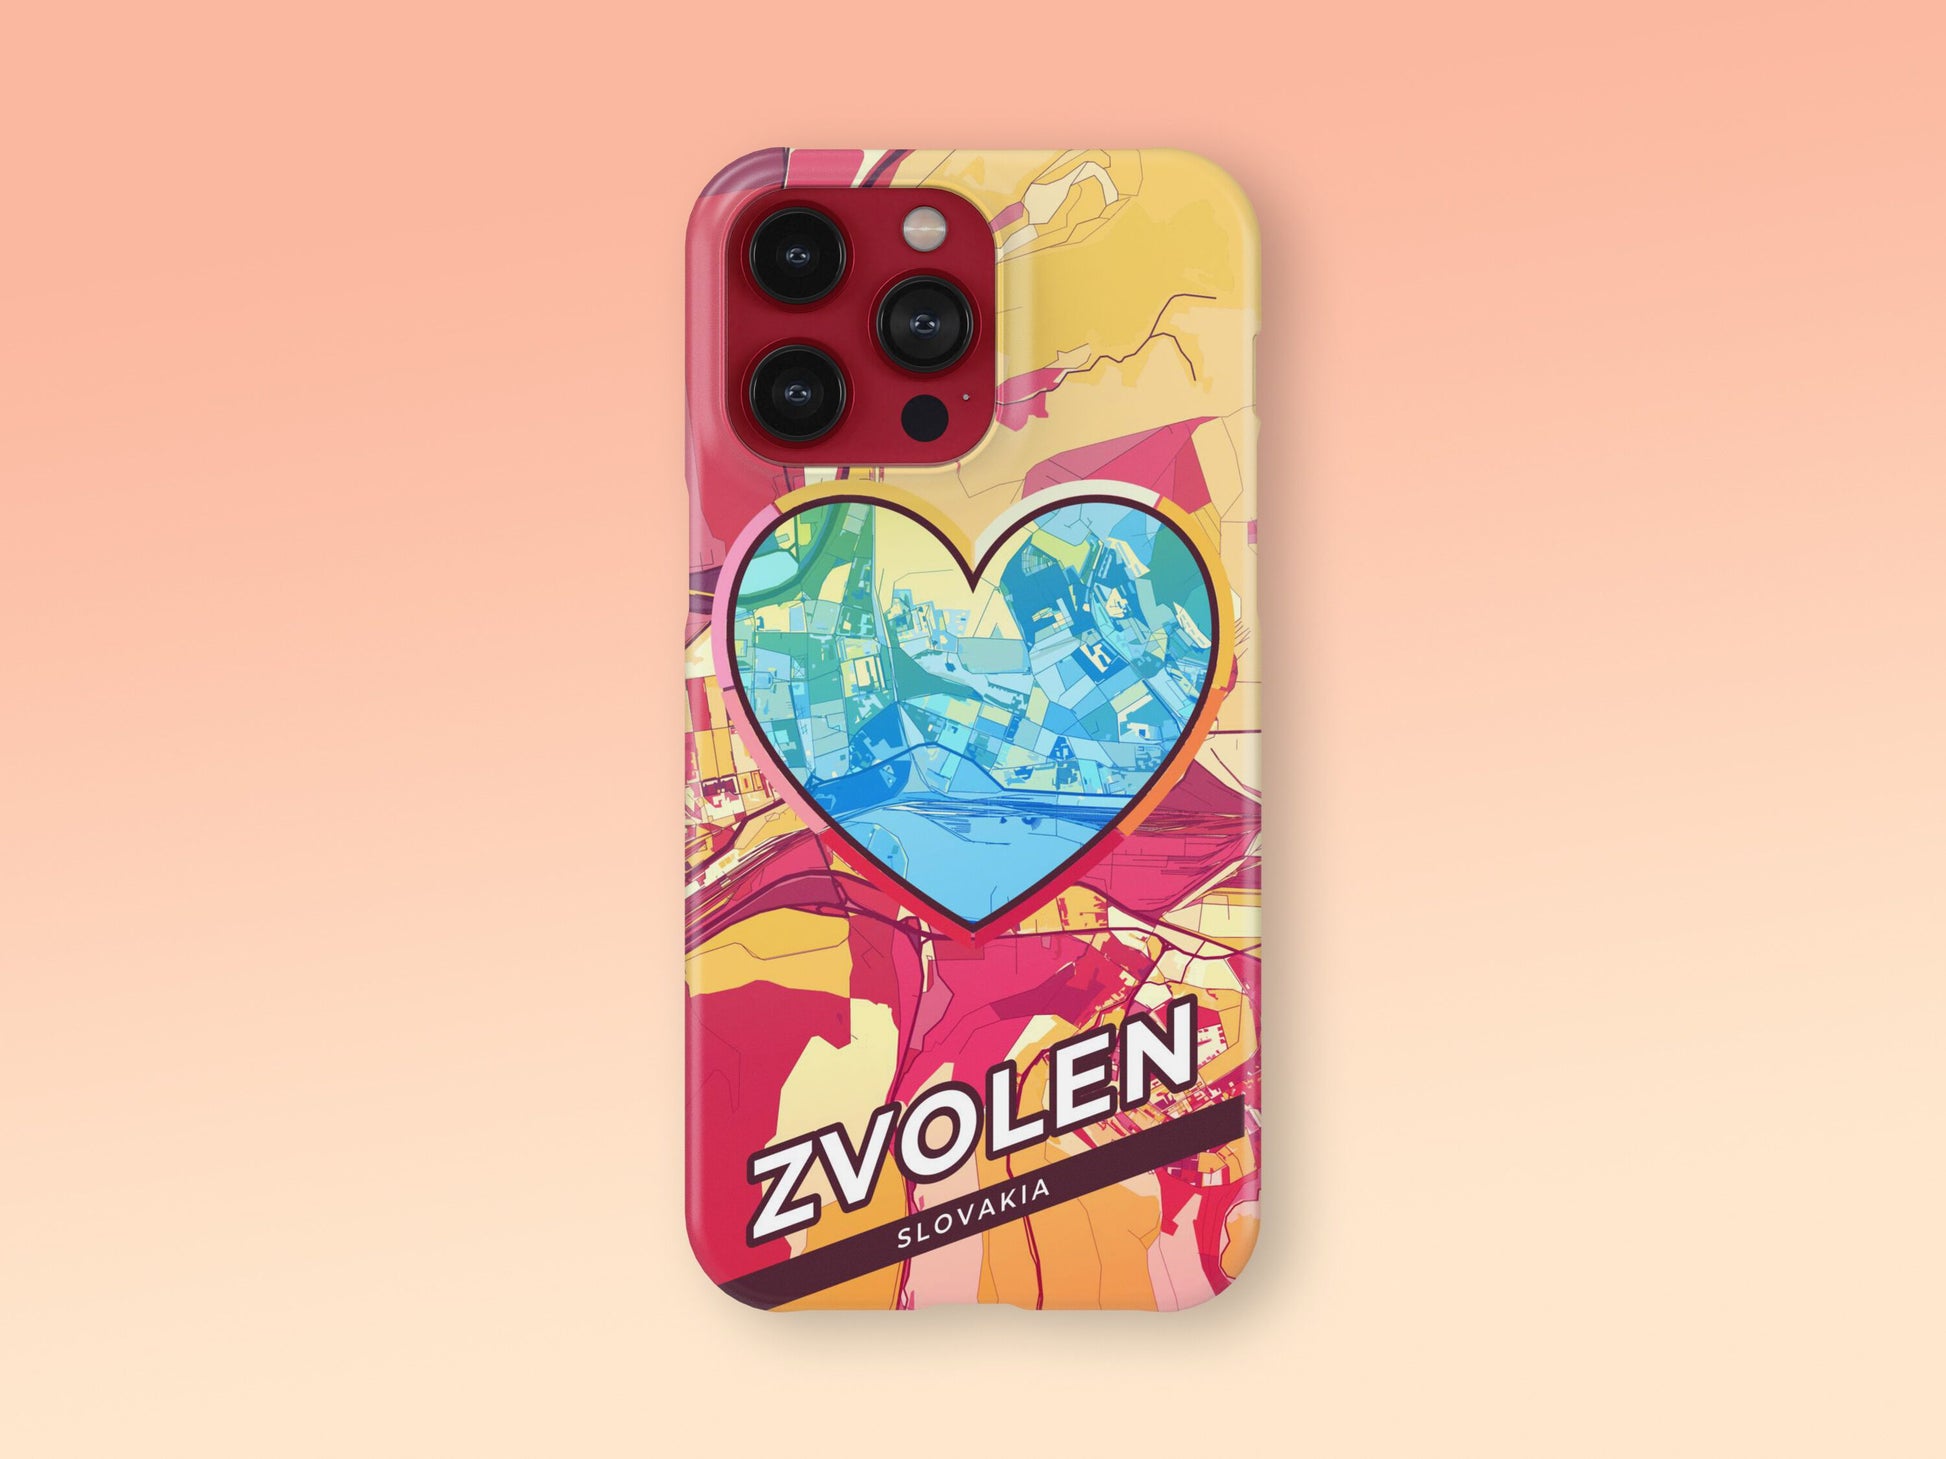 Zvolen Slovakia slim phone case with colorful icon. Birthday, wedding or housewarming gift. Couple match cases. 2